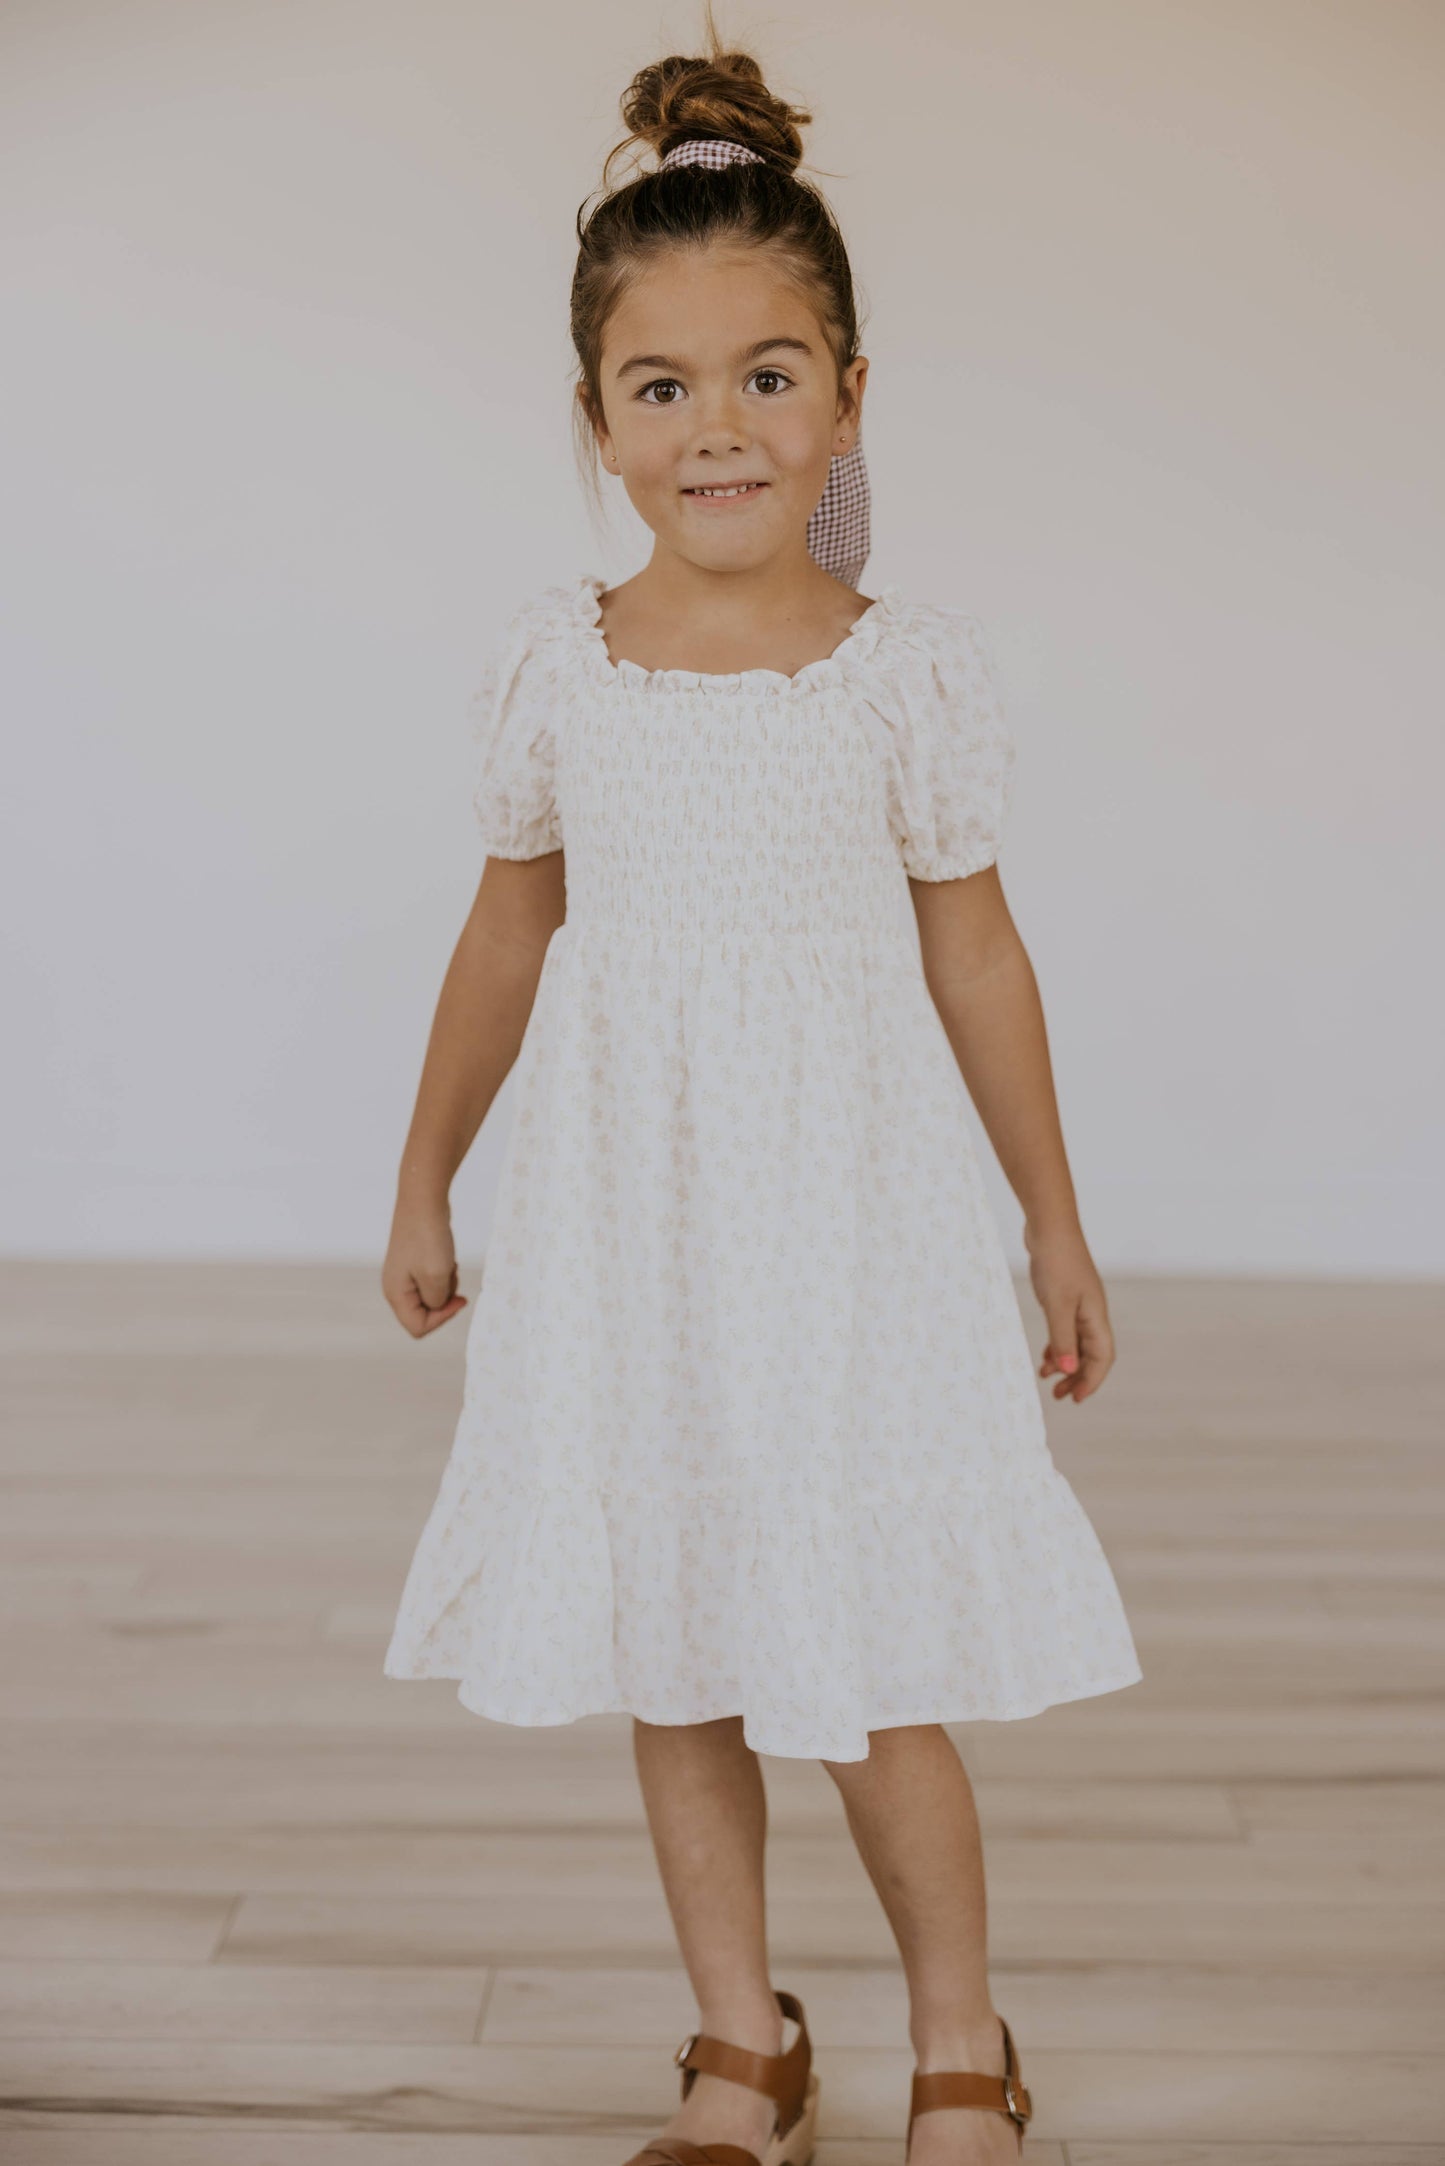 The Whimsy Dress - Holt and Ivy